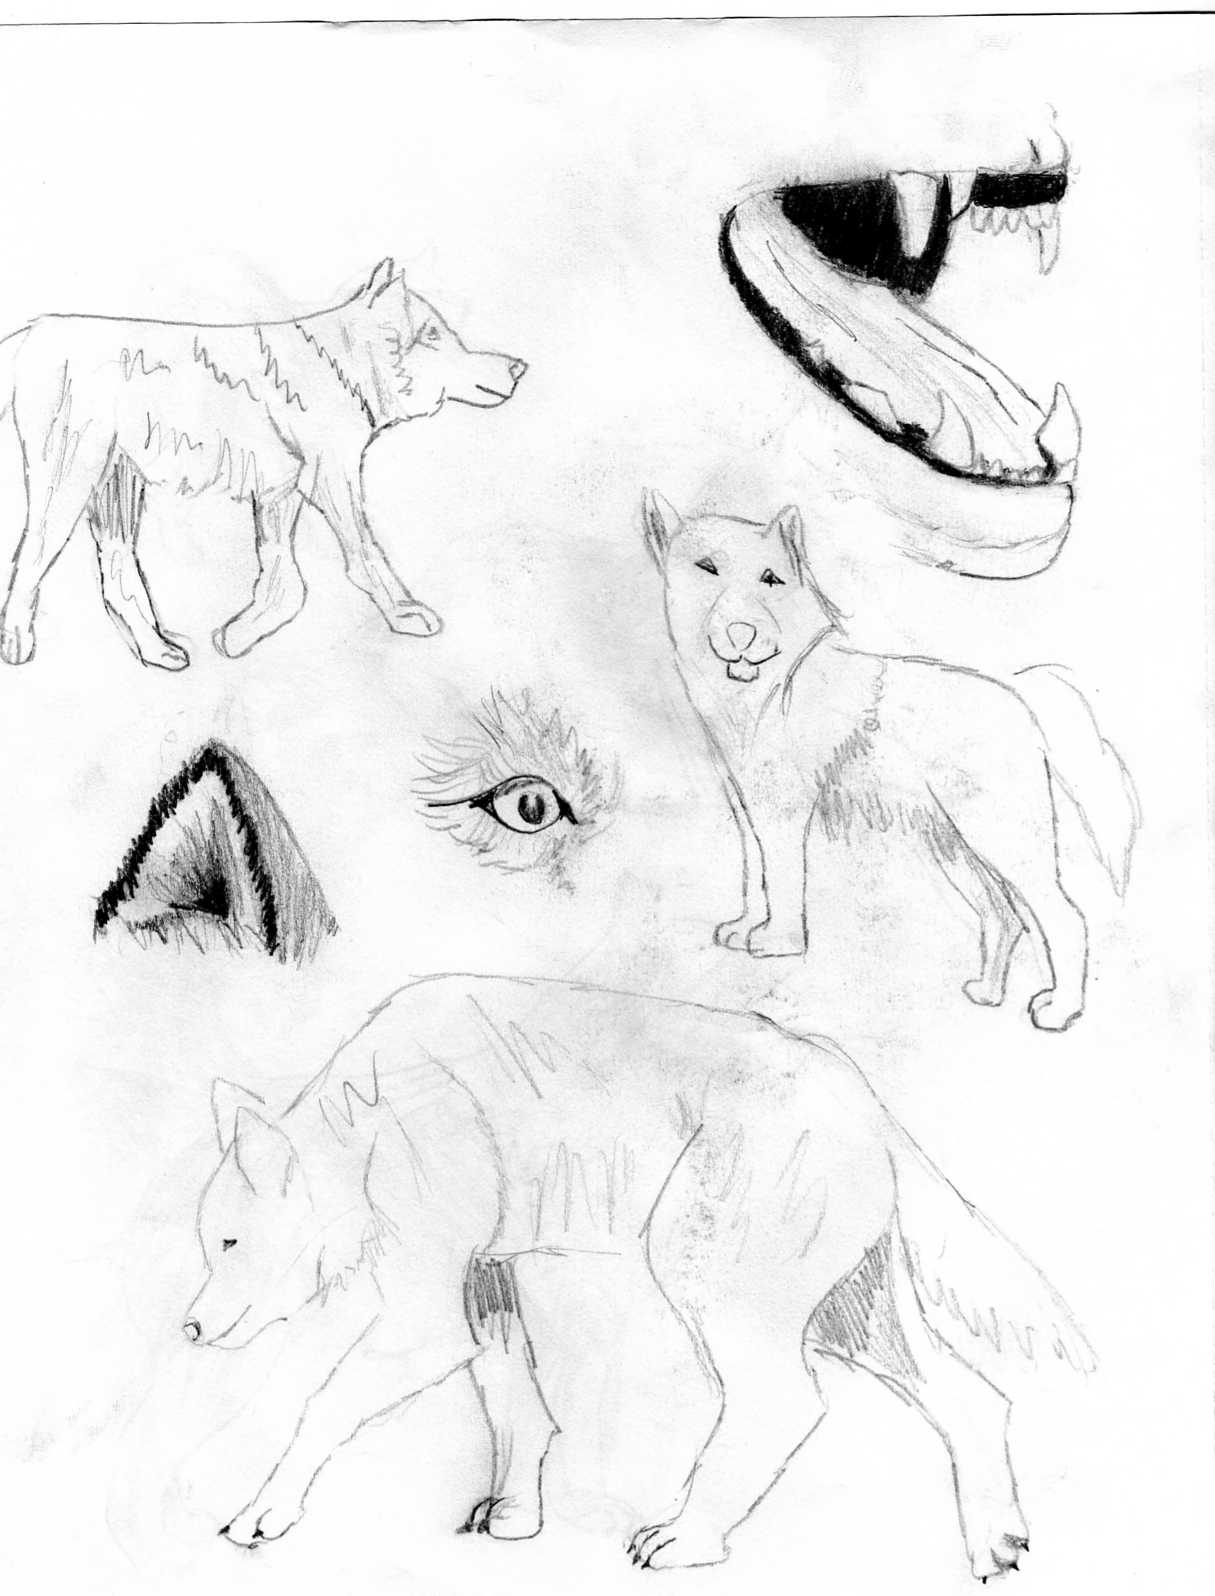 study on wolves/dogs part 2 by eriepilot44